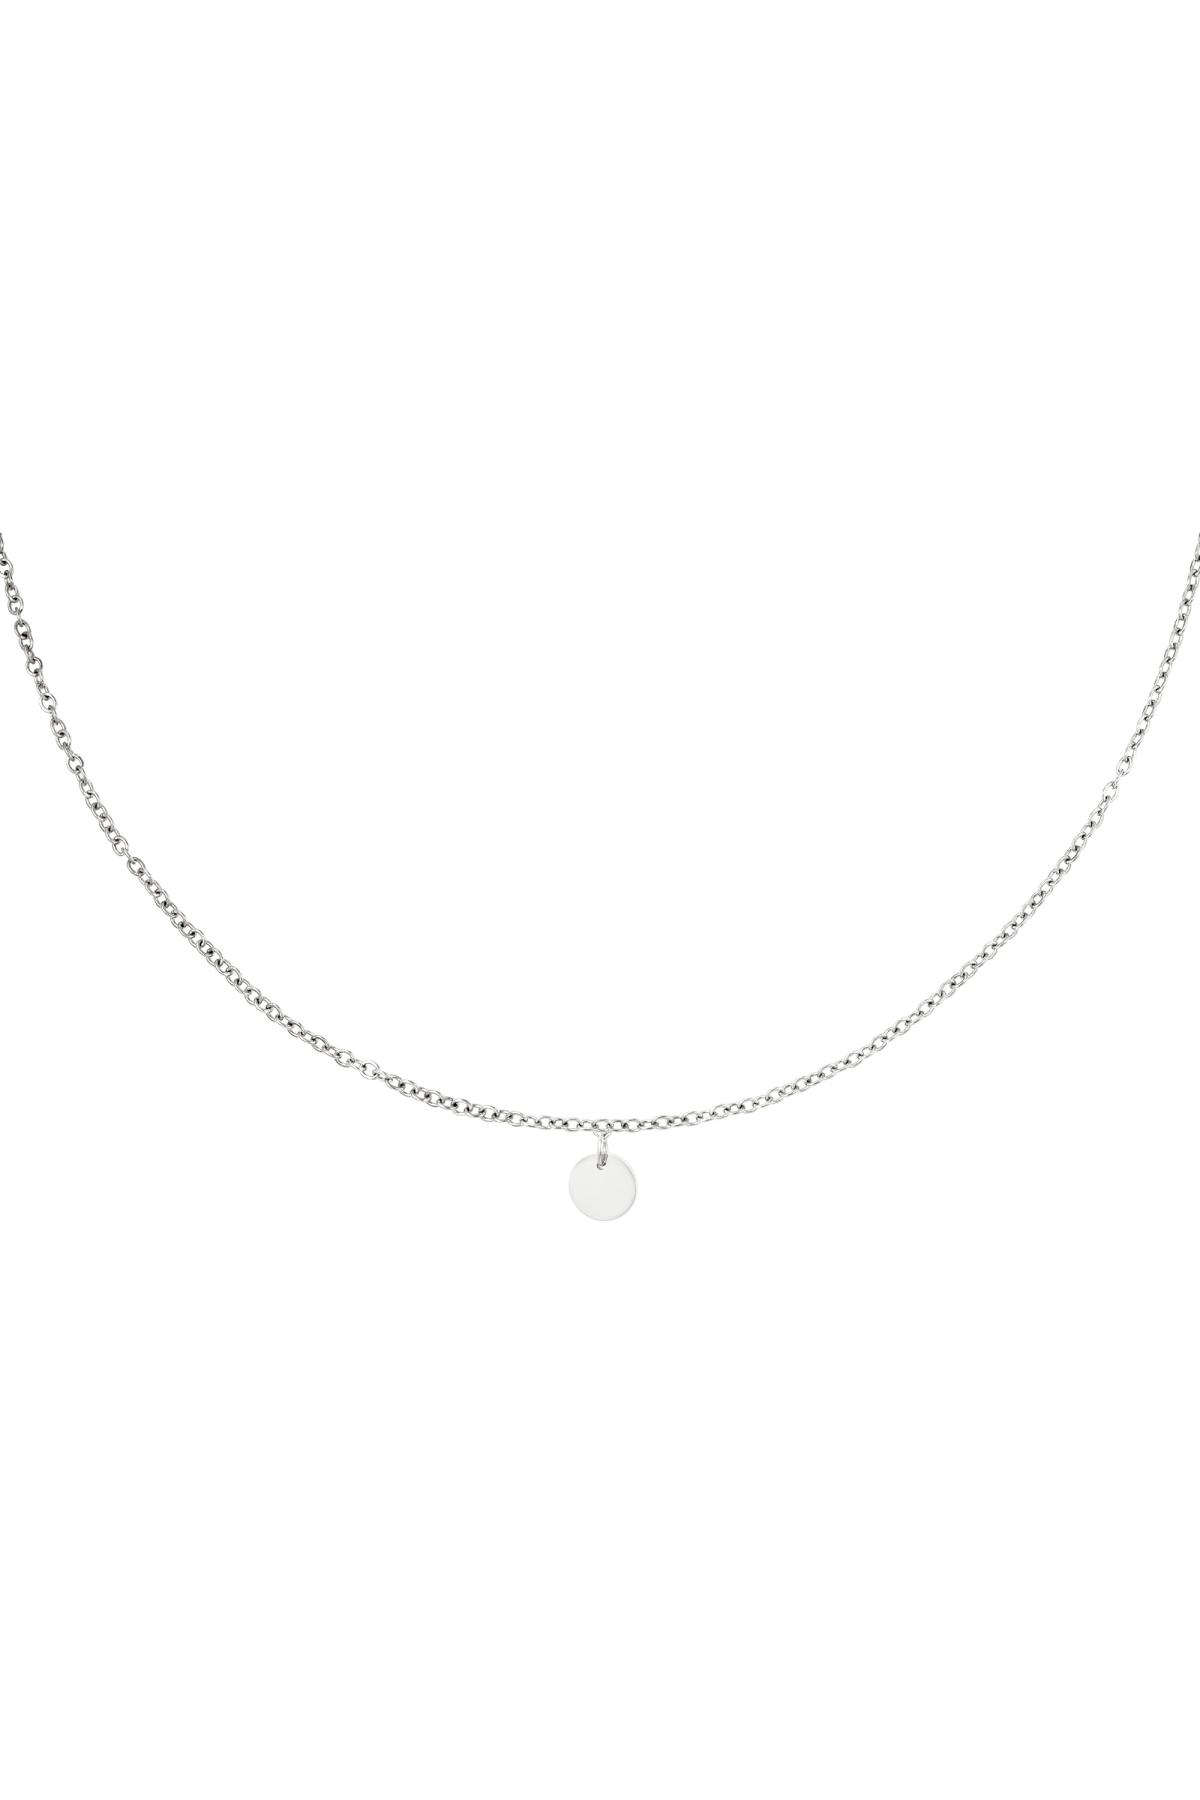 Silver / Necklace with little circle pendant Silver Stainless Steel 